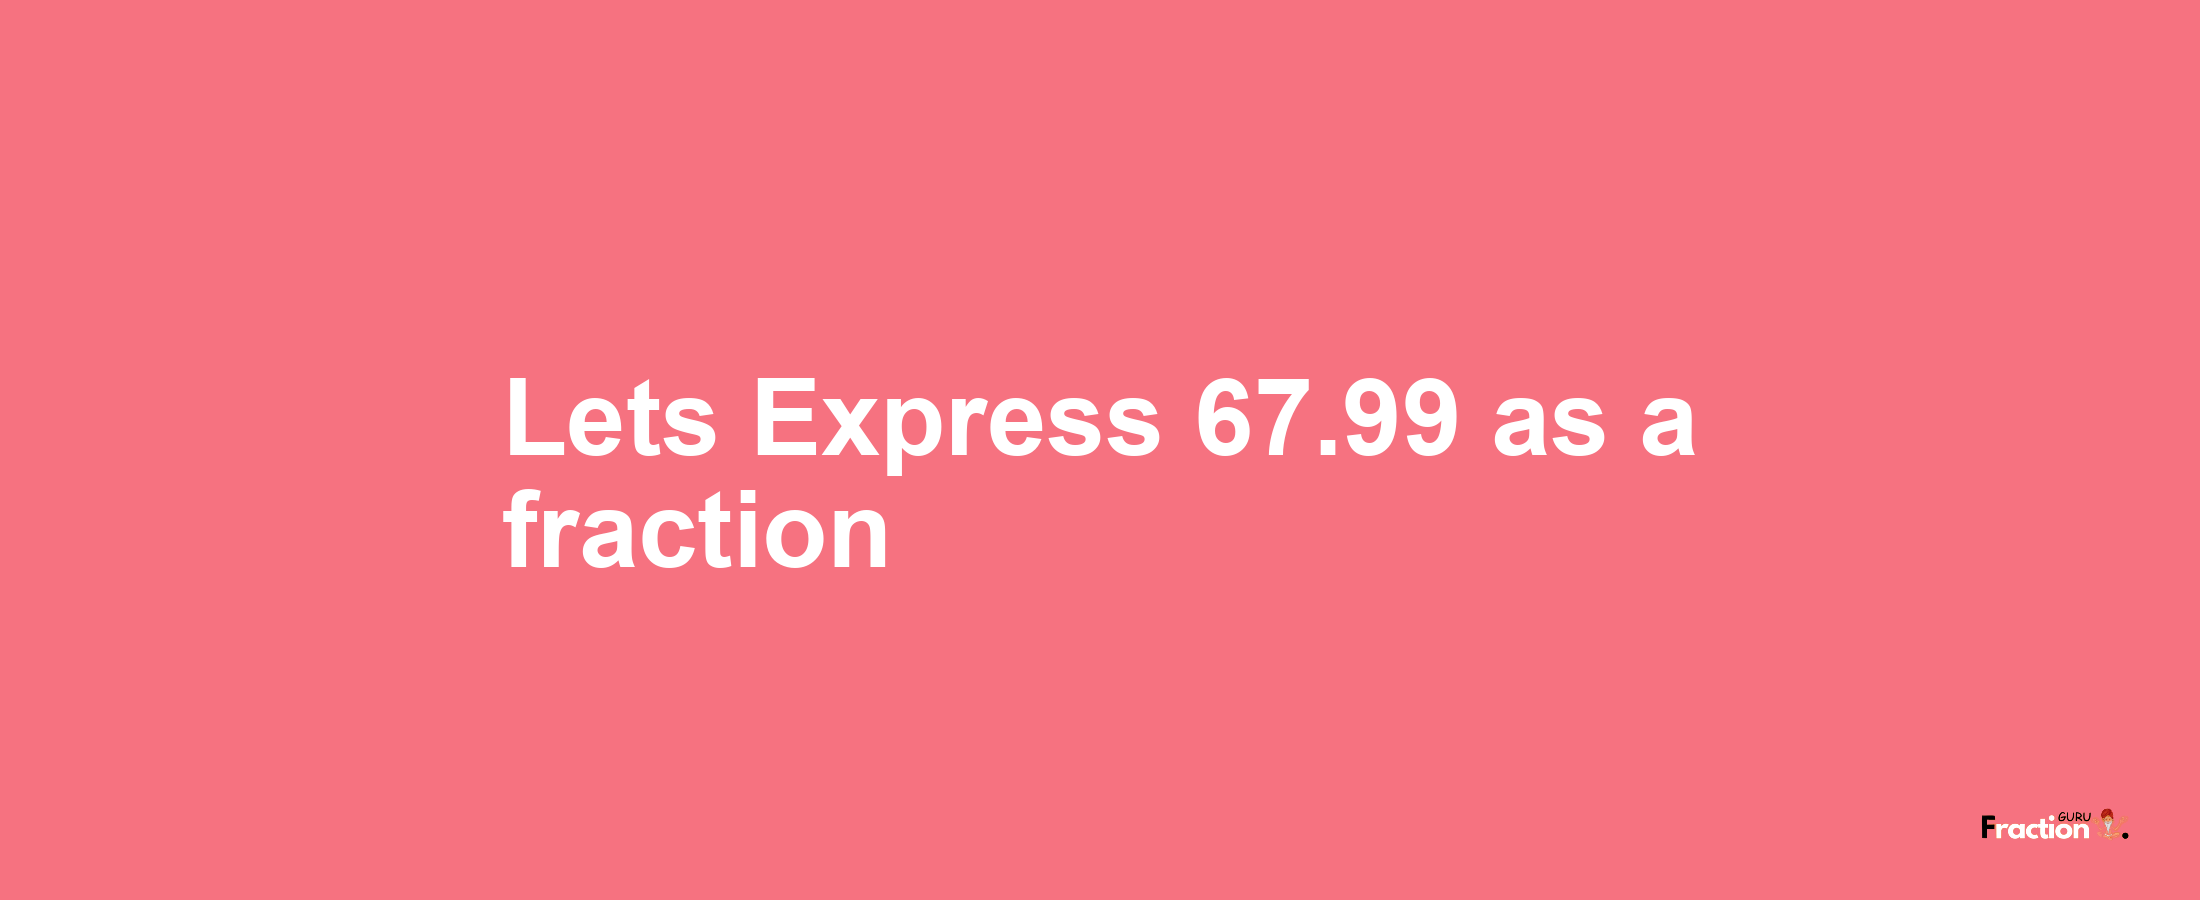 Lets Express 67.99 as afraction